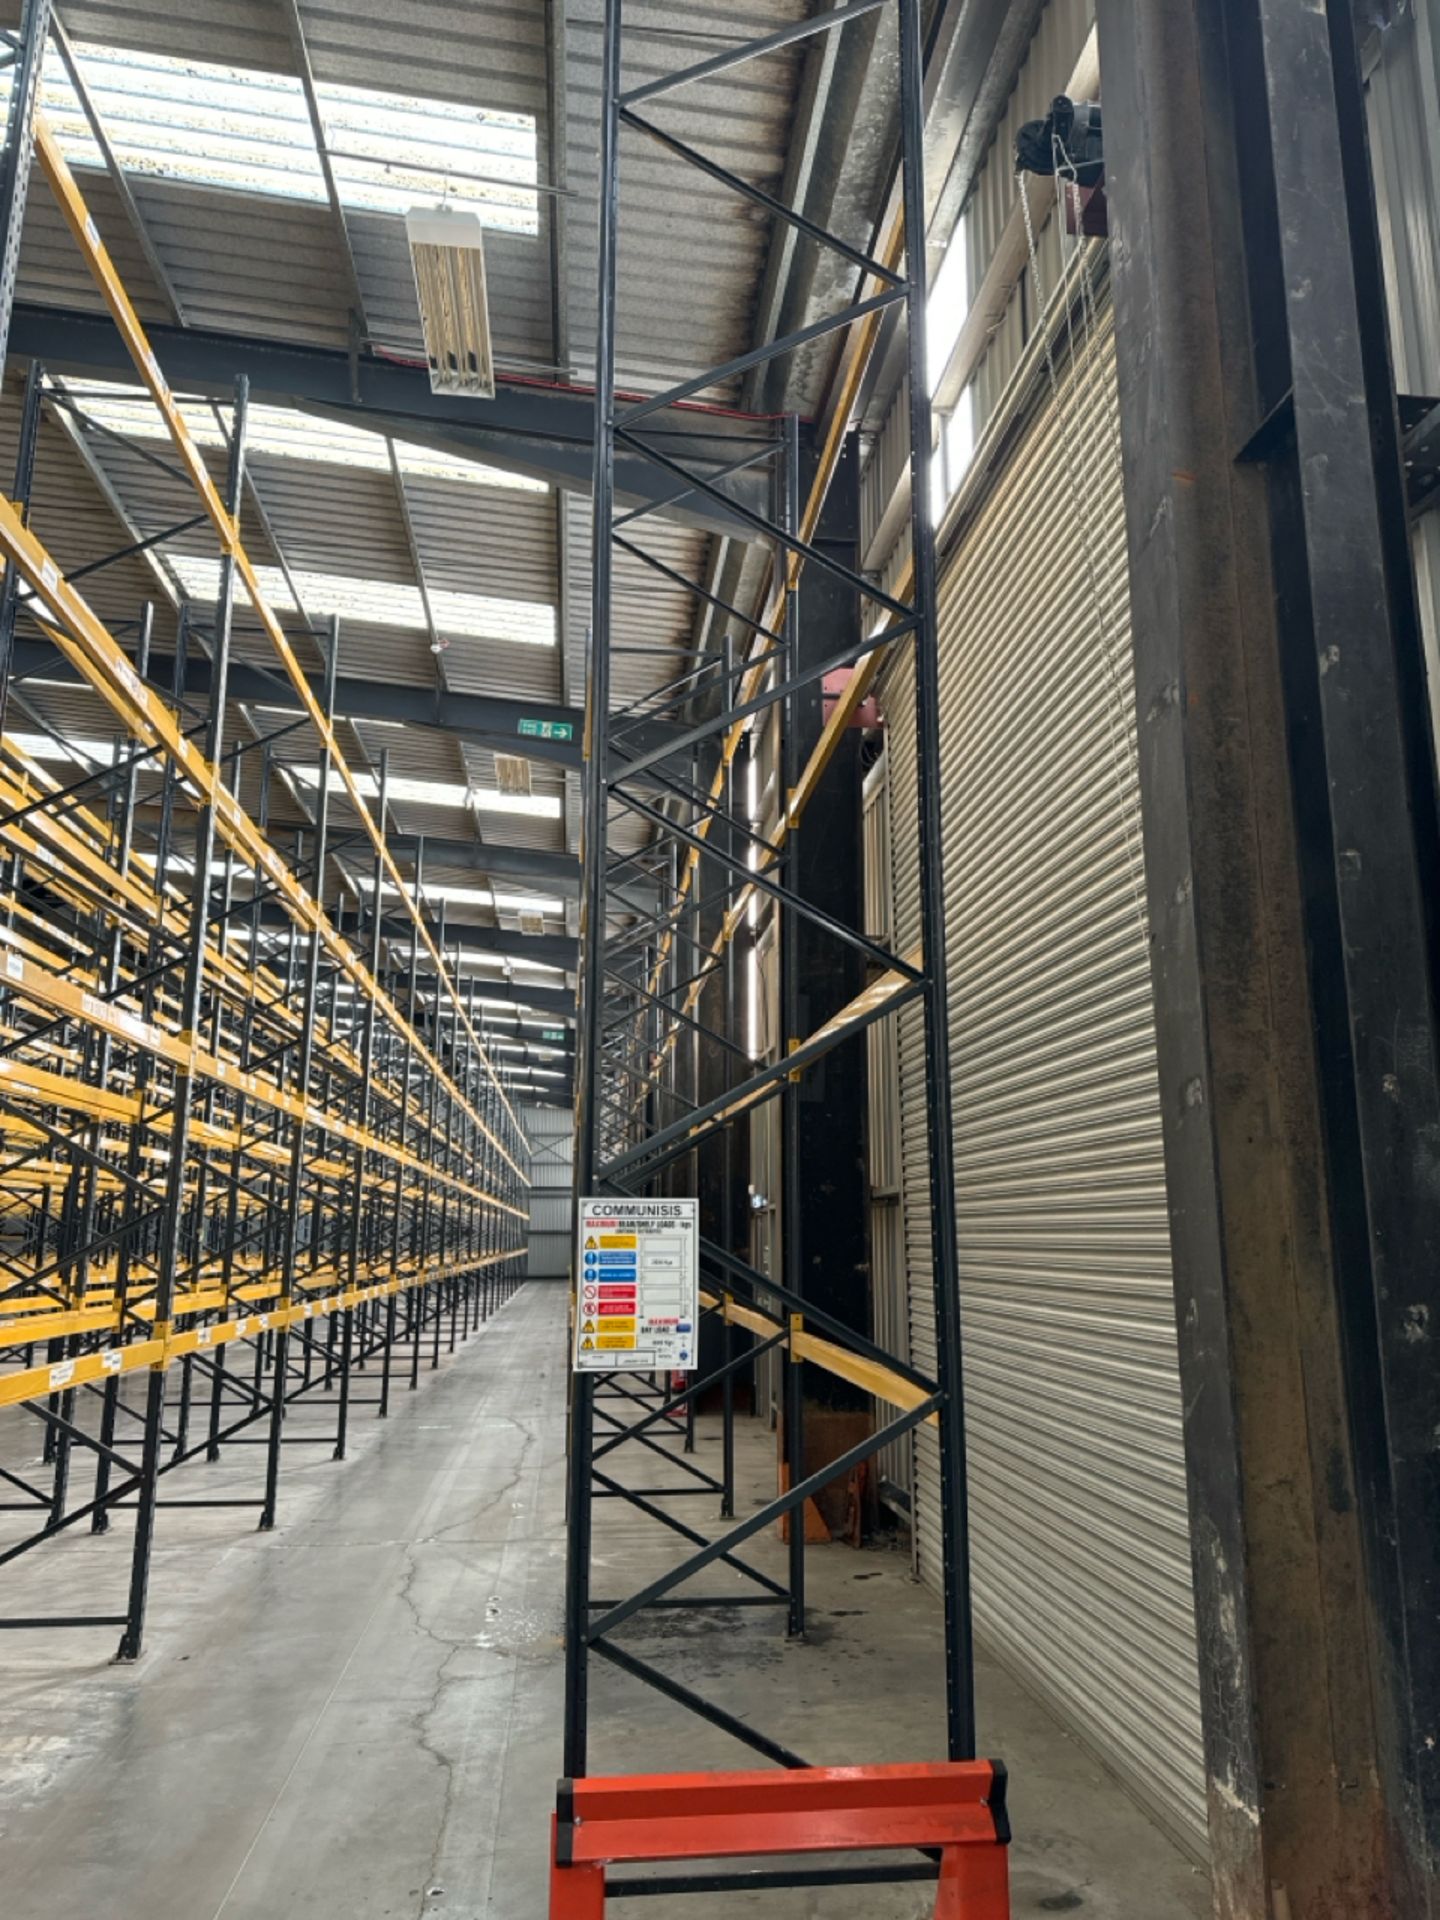 20 Bays Of Boltless Industrial Pallet Racking - Image 2 of 8